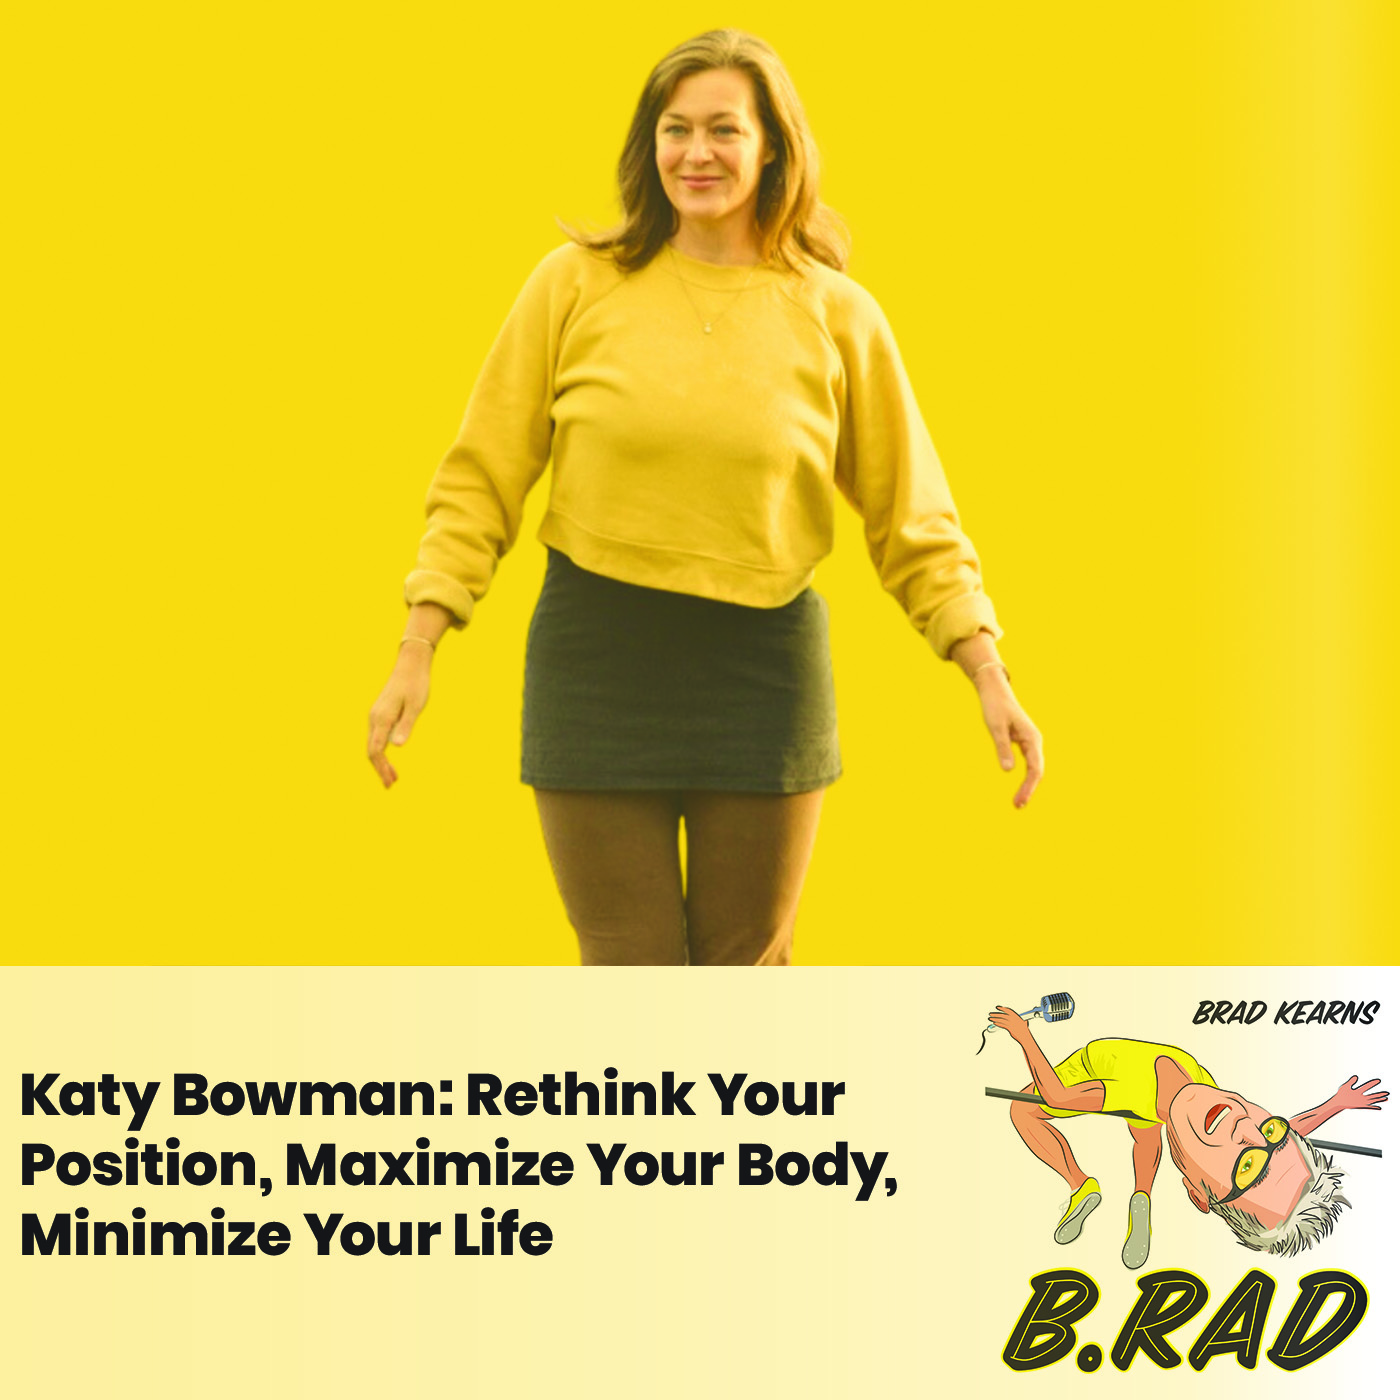 Katy Bowman: Rethink Your Position, Maximize Your Body, Minimize Your Life